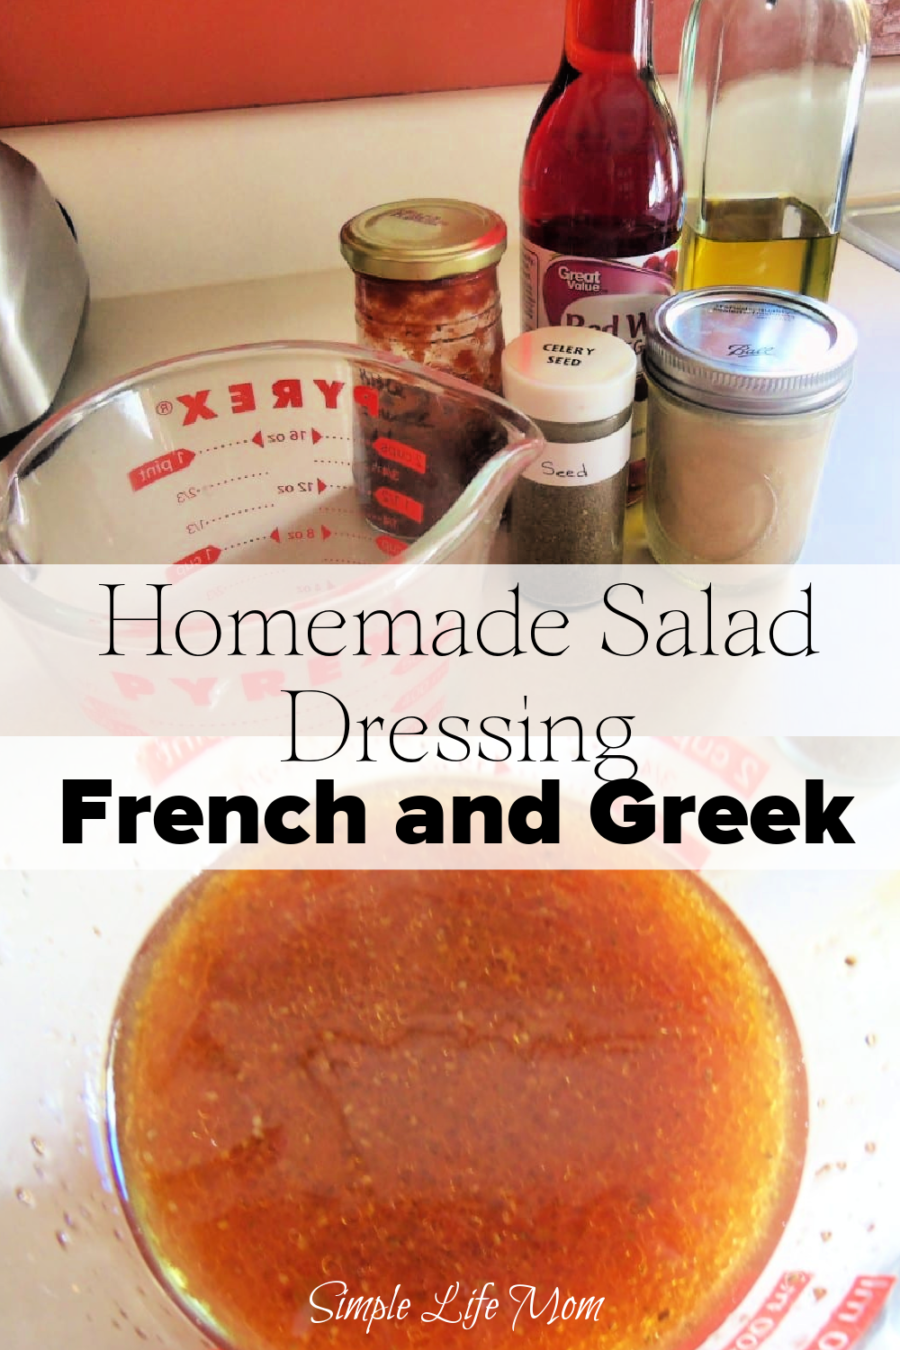 Homemade-Salad-Dressing-French-and-Greek-dressing